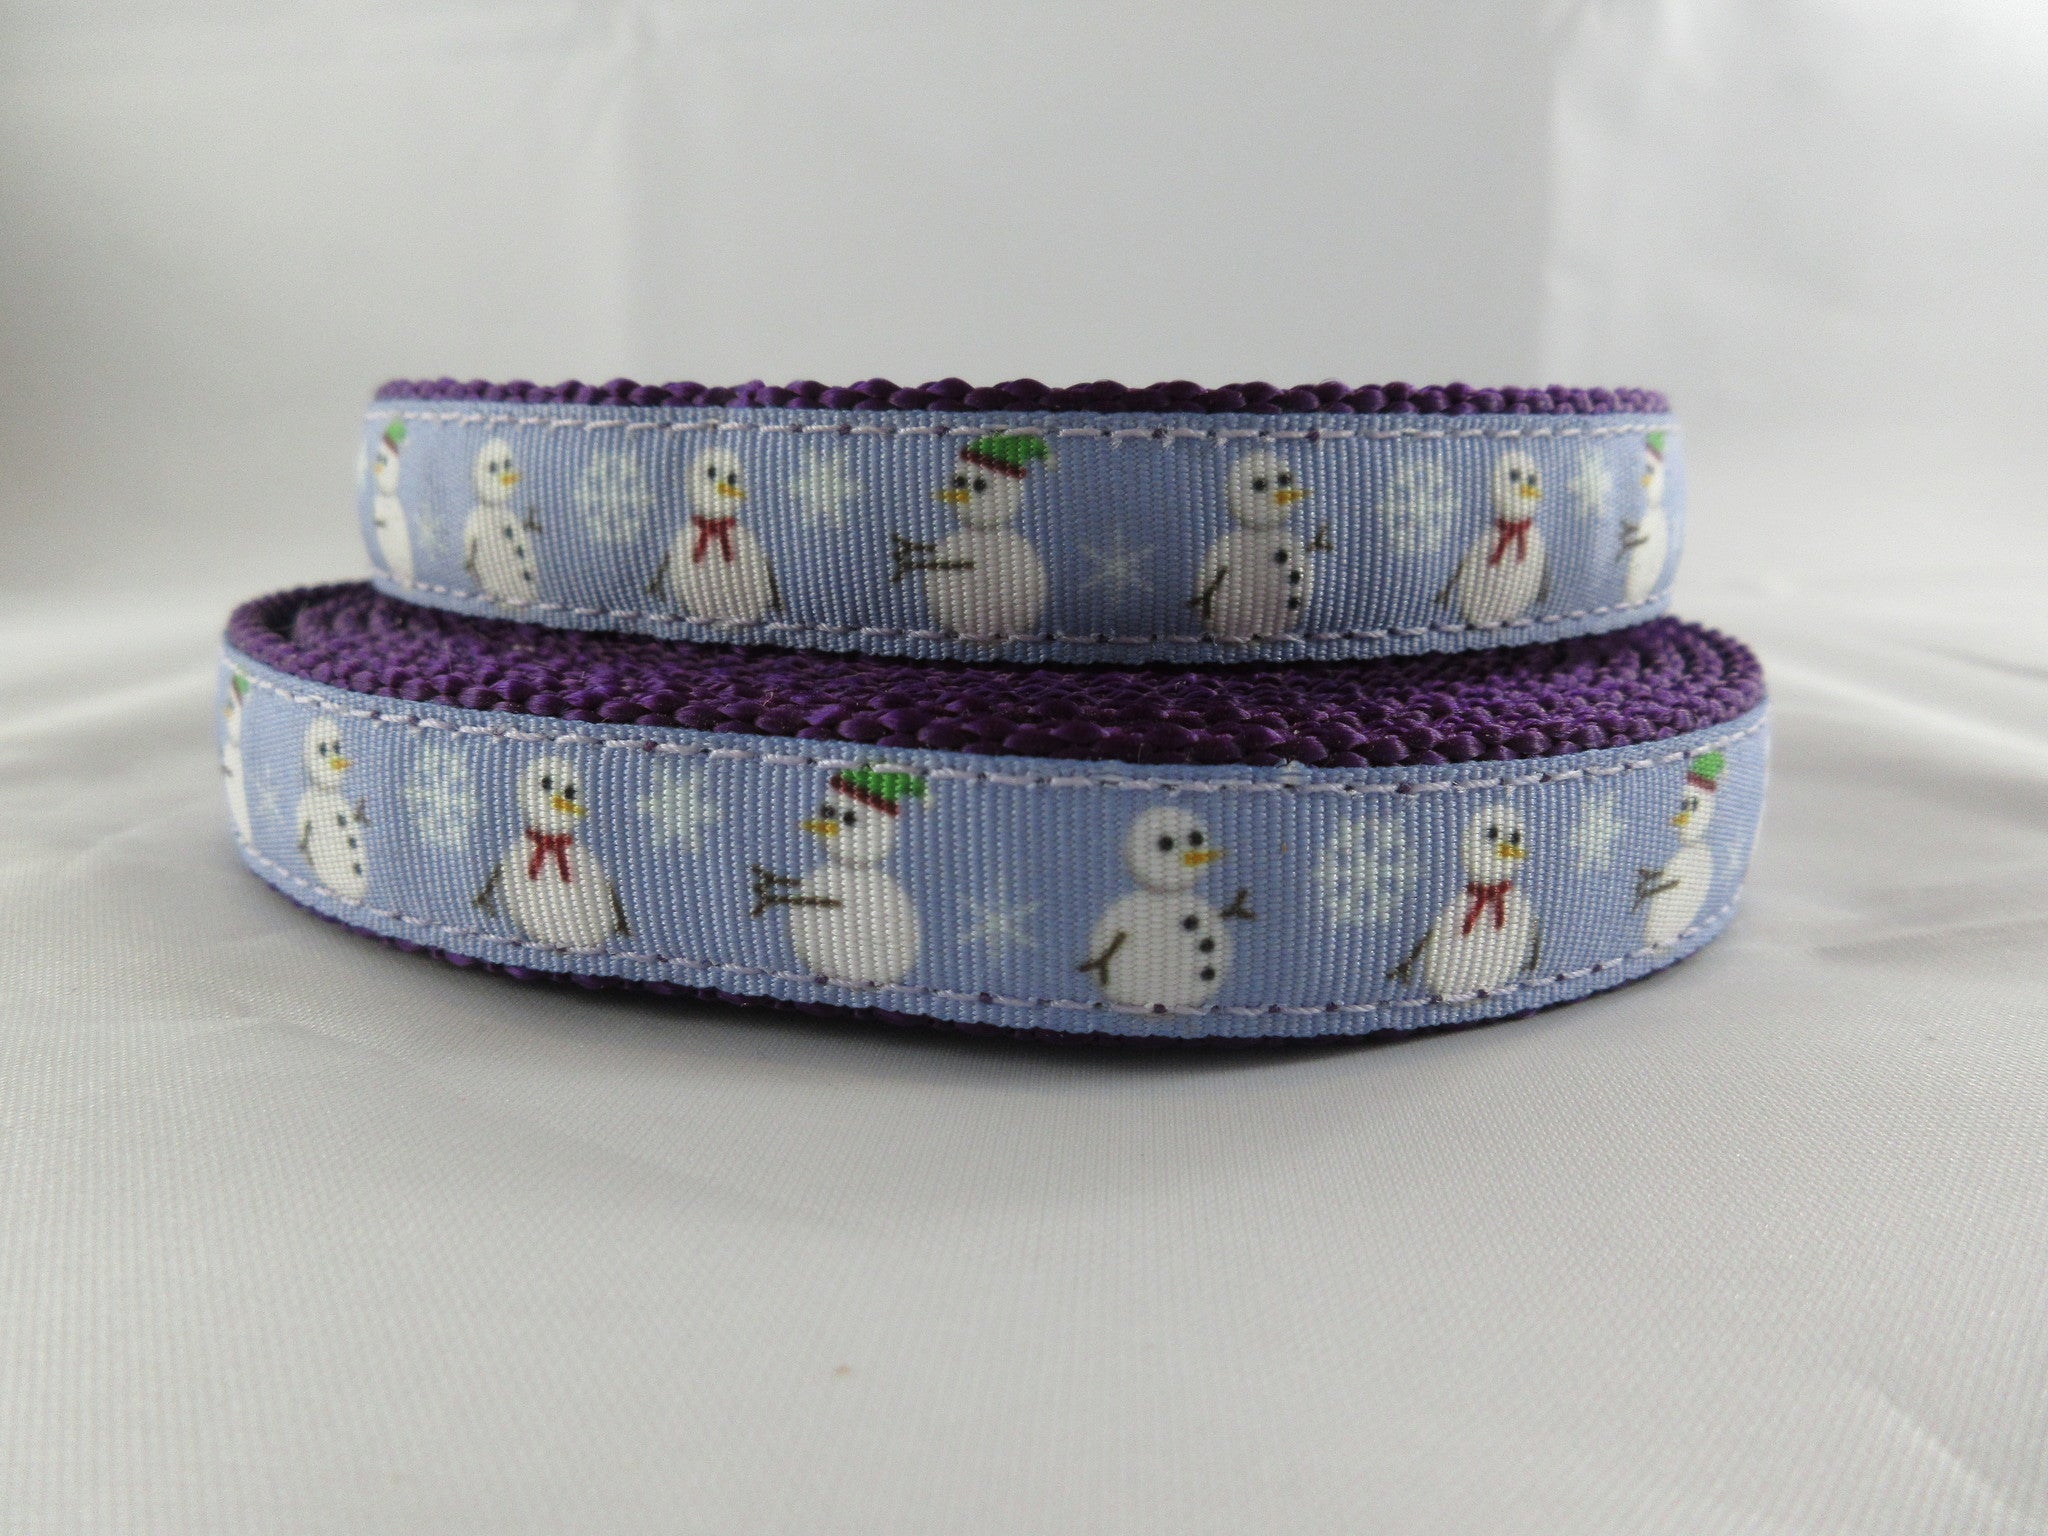 3/4" Snowman Dog Collar - Penny and Hoover's Pig Pen